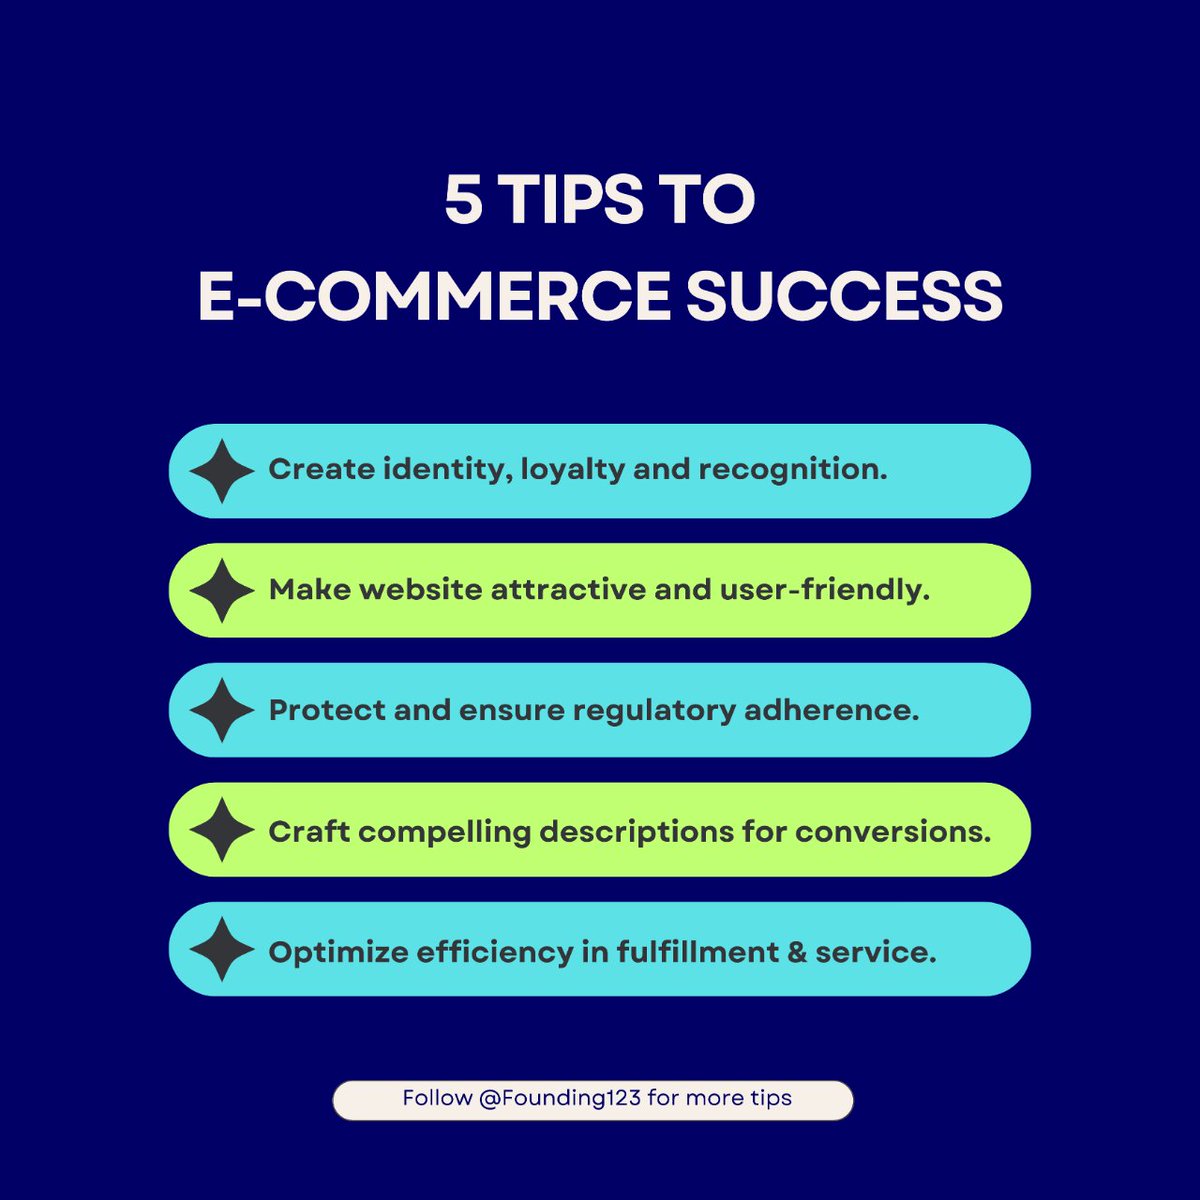 🛒 Elevate your e-commerce game with MFP12's 5 tips: Brand identity, user-friendly design, security, compelling descriptions, and efficient service.

#EcommerceSuccess #WebsiteDesign #OperationalEfficiency #MFP #BeAFounder